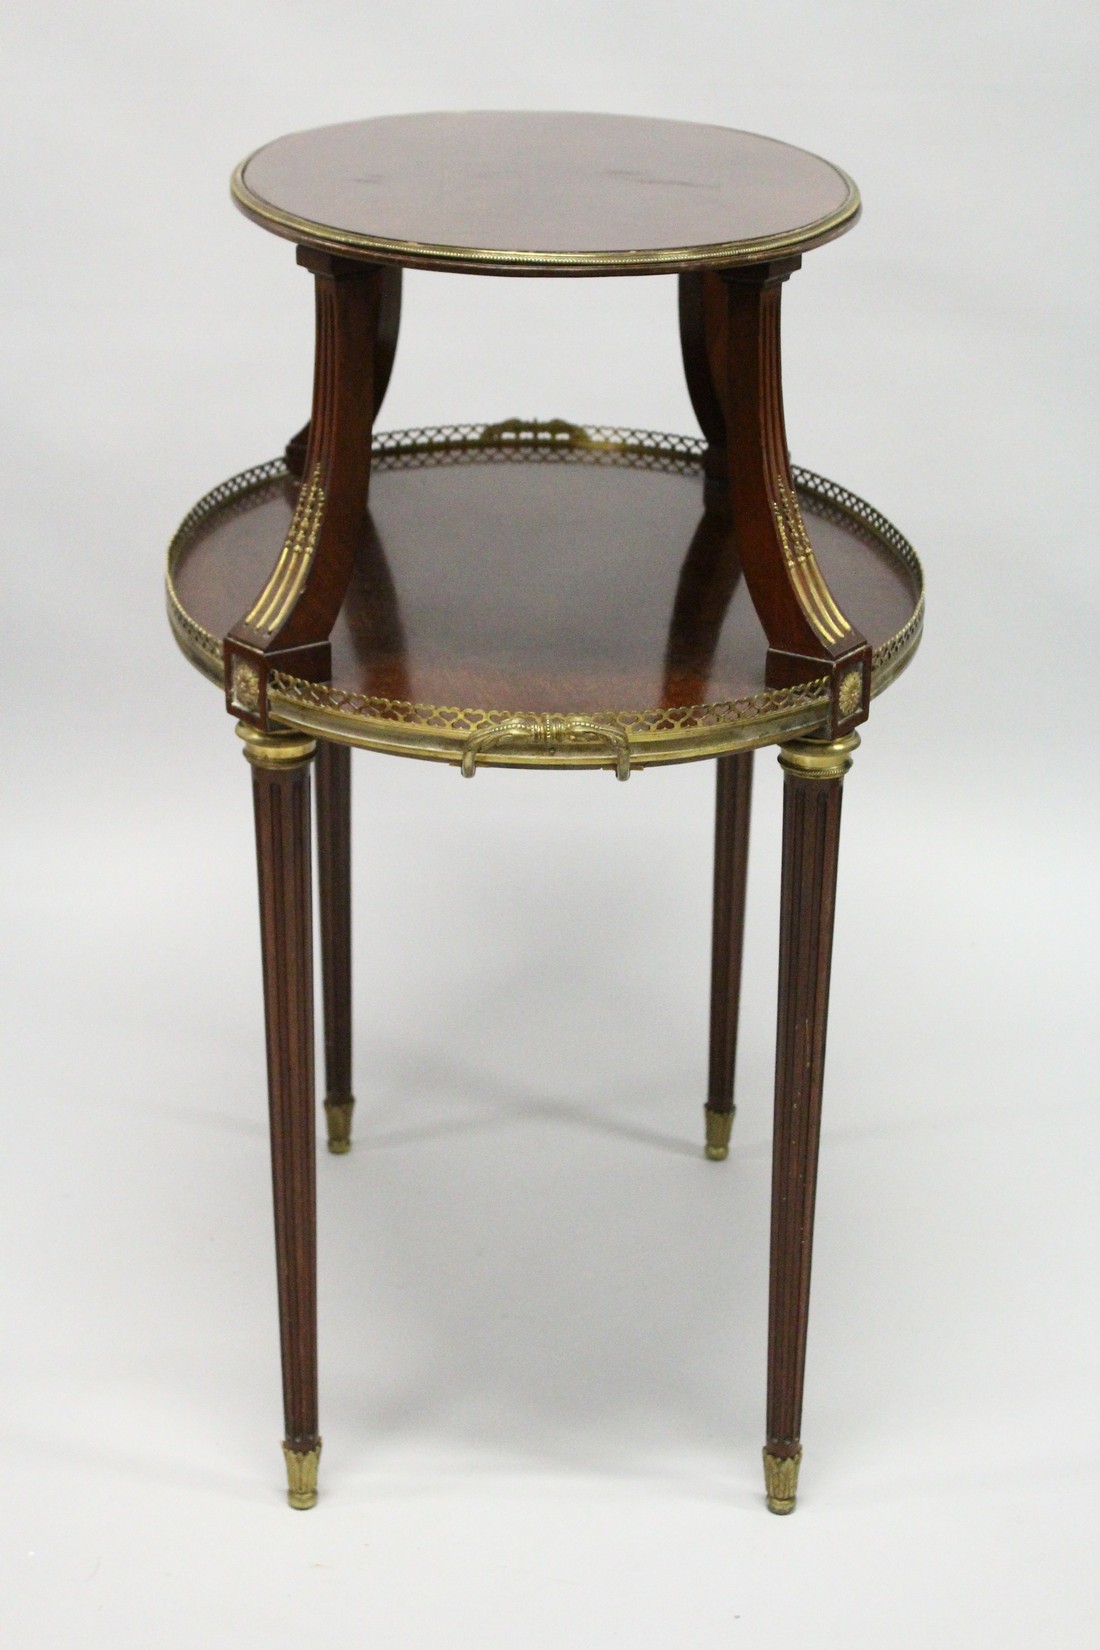 A VERY GOOD 19TH CENTURY MAHOGANY OVAL AND TWO TIER ETAGERE, with brass banding and gallery on - Image 6 of 6